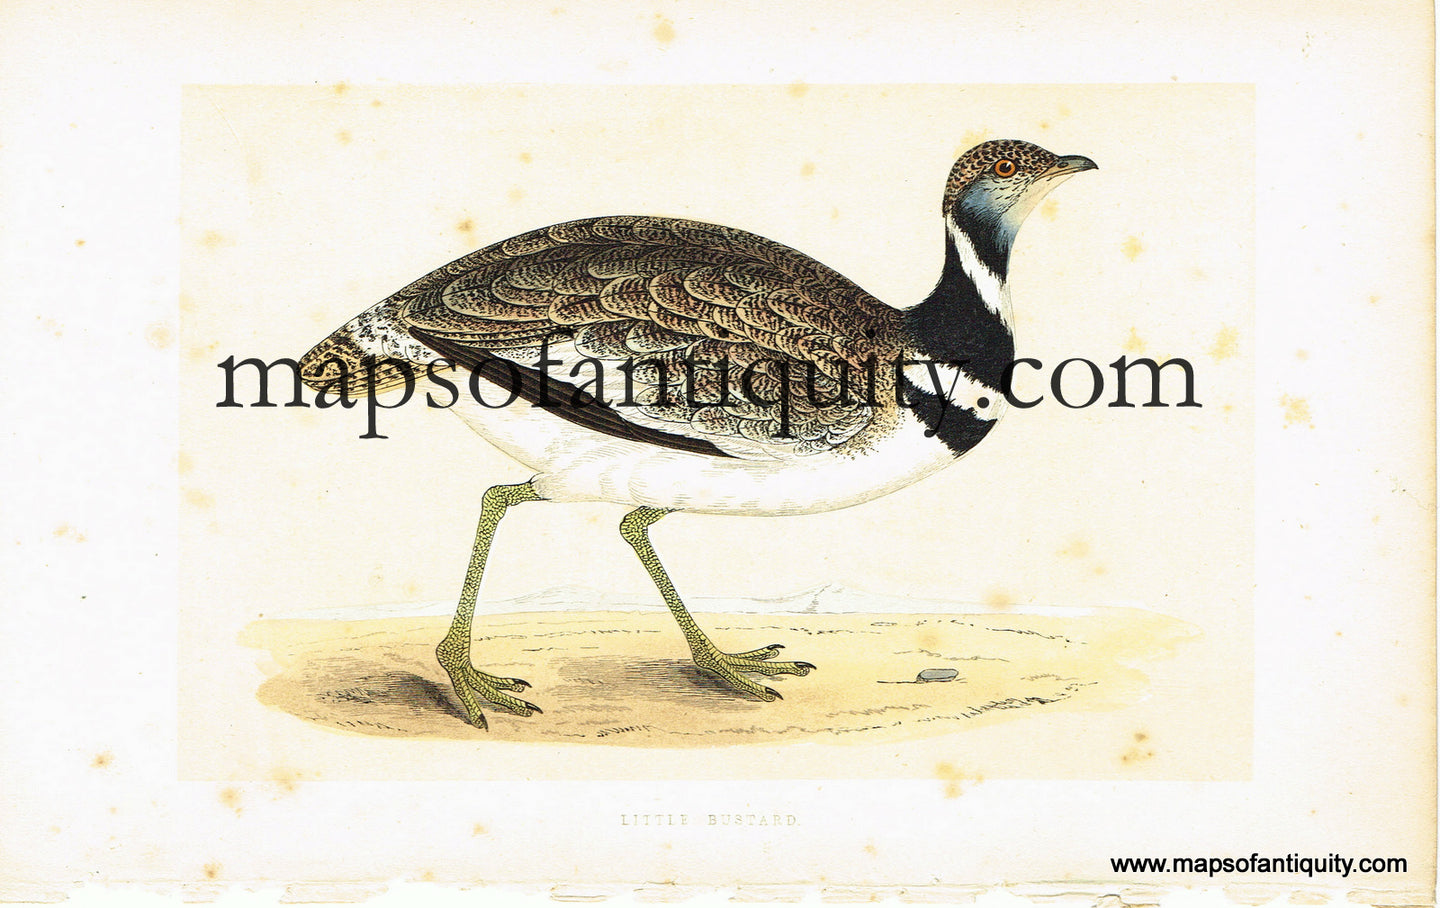 Antique-Hand-Colored-Engraved-Illustration-Little-Bustard-Antique-Prints-Natural-History-Birds-1851-Morris-Maps-Of-Antiquity